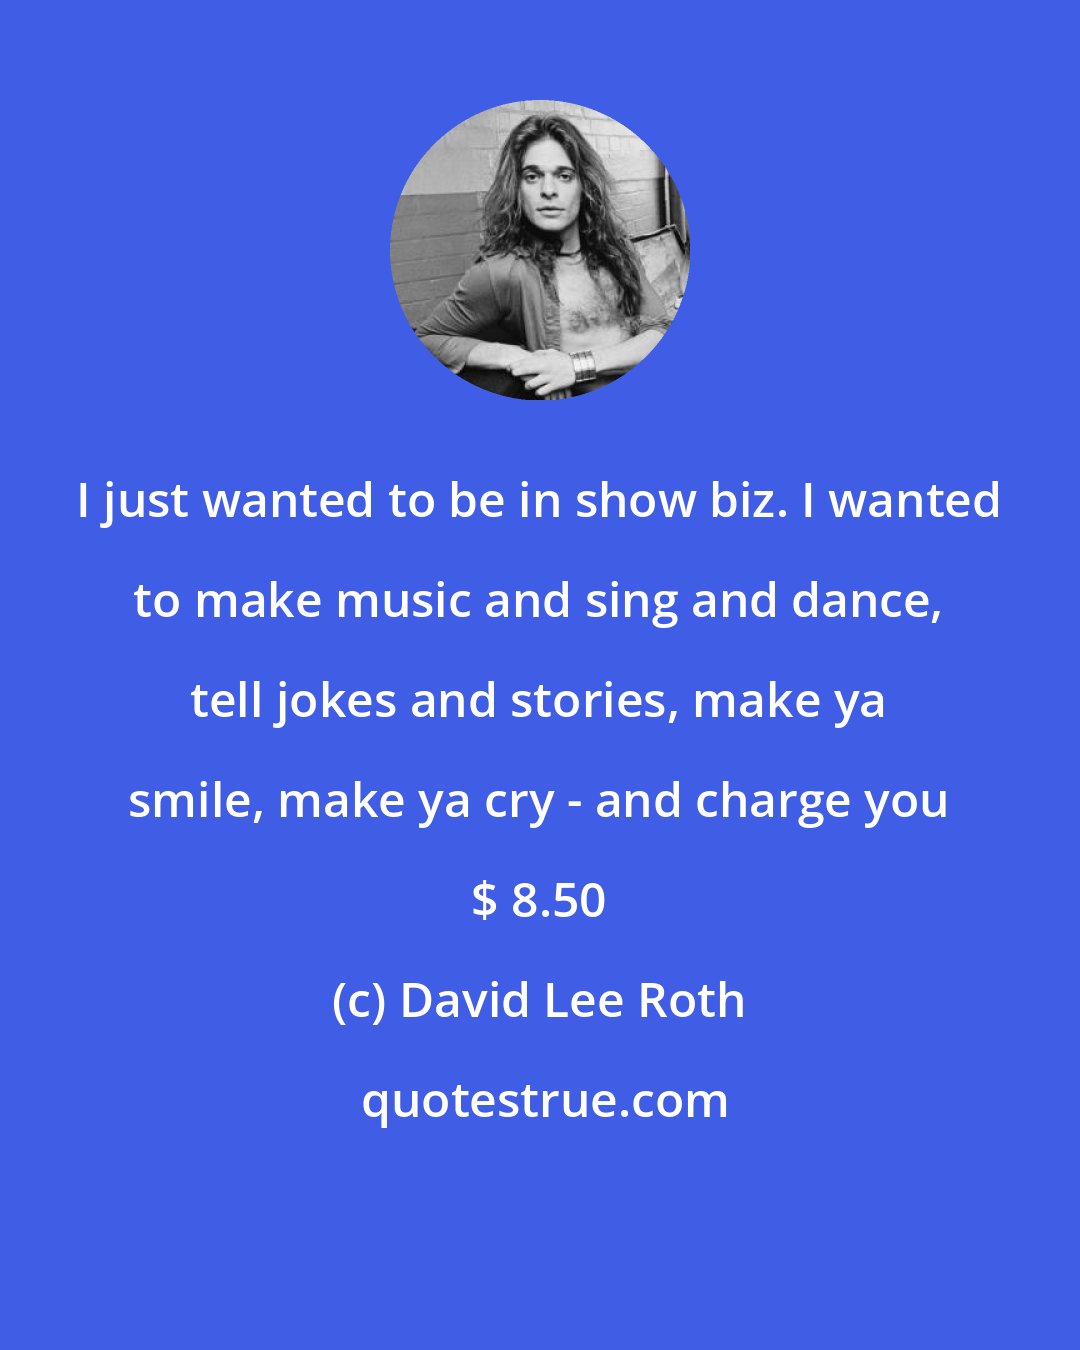 David Lee Roth: I just wanted to be in show biz. I wanted to make music and sing and dance, tell jokes and stories, make ya smile, make ya cry - and charge you $ 8.50